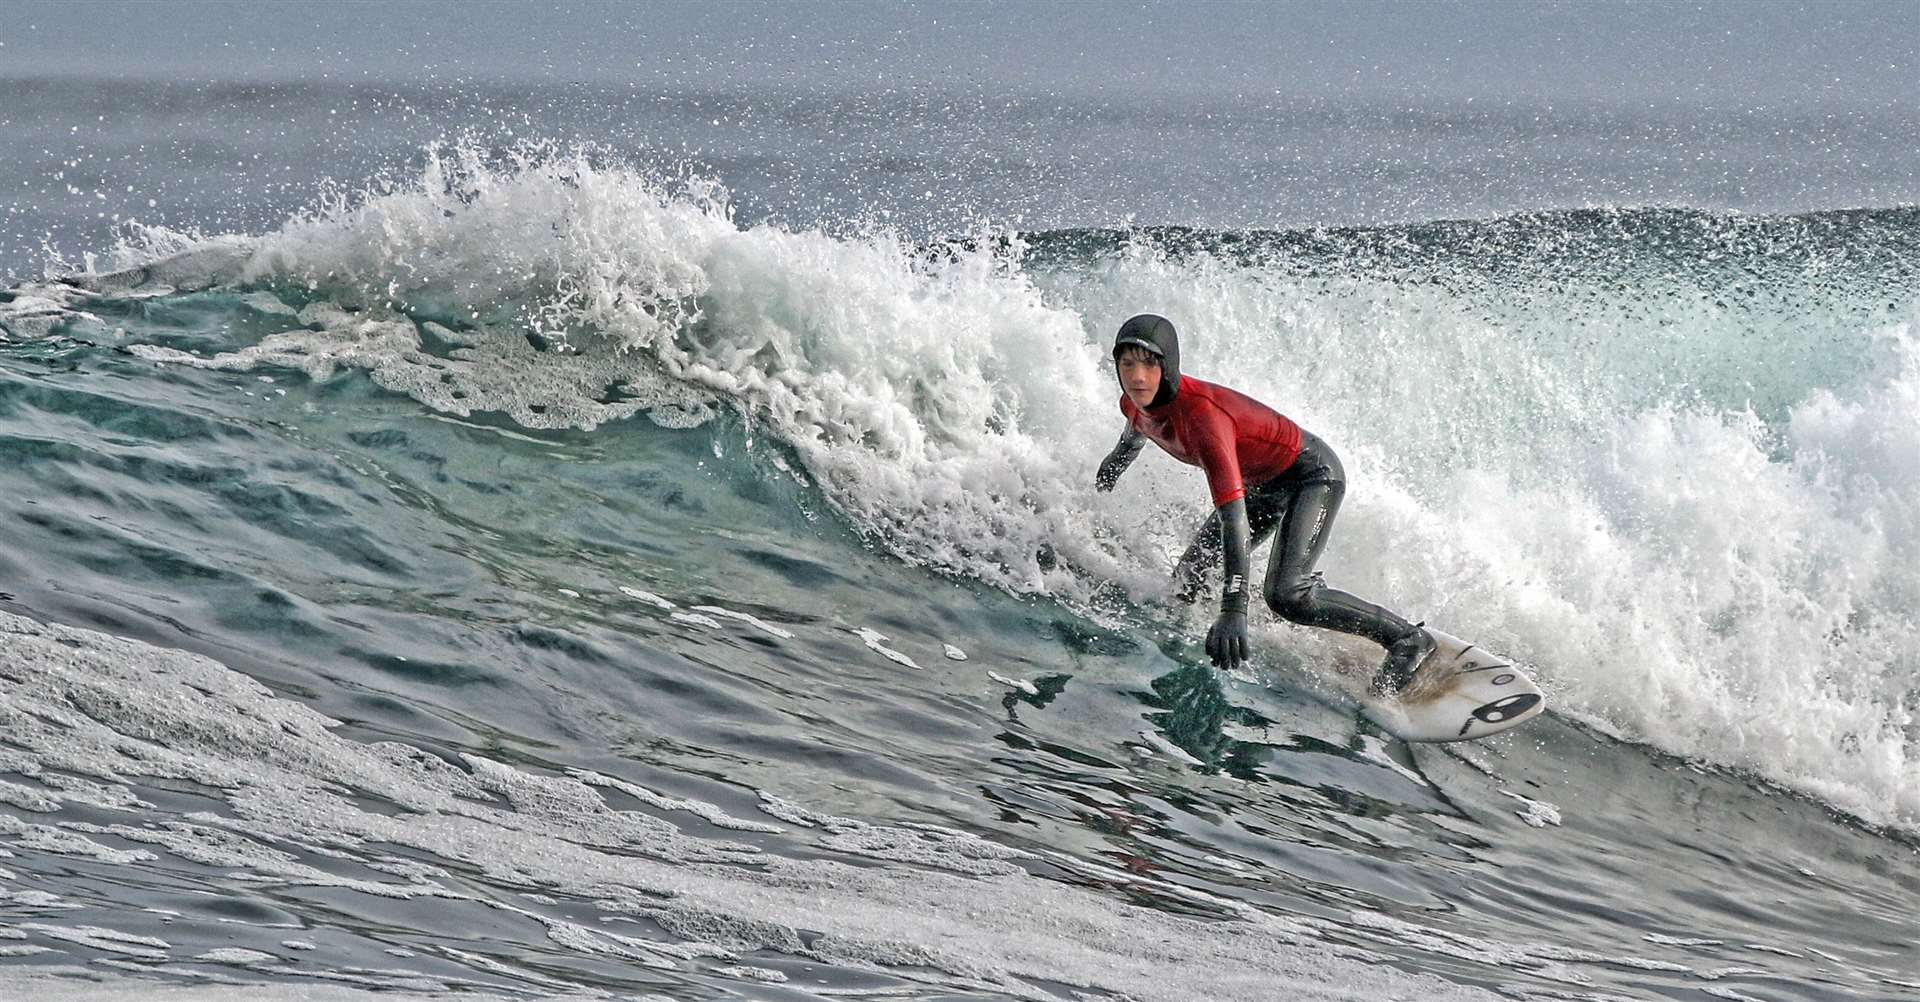 Craig Mclachlan competes at the Scottish National Surfing Championships in Thurso. Picture: James Gunn